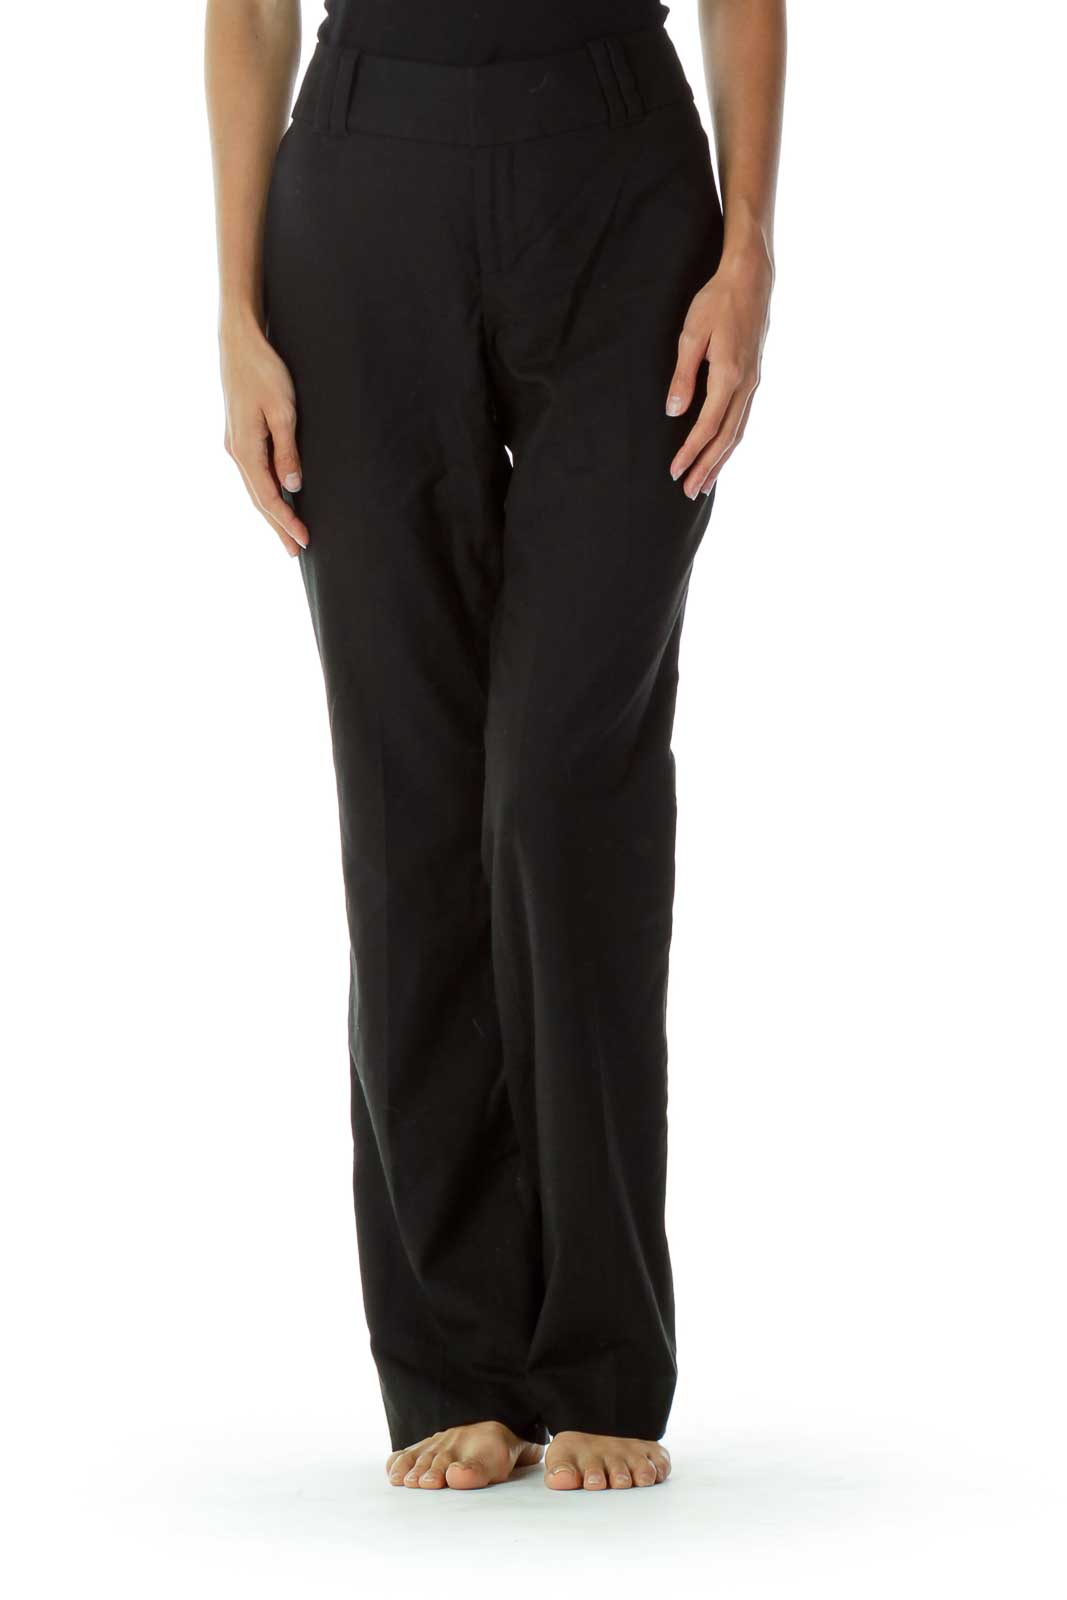 Black Polyester/rayon/spandex Pull-on Pants